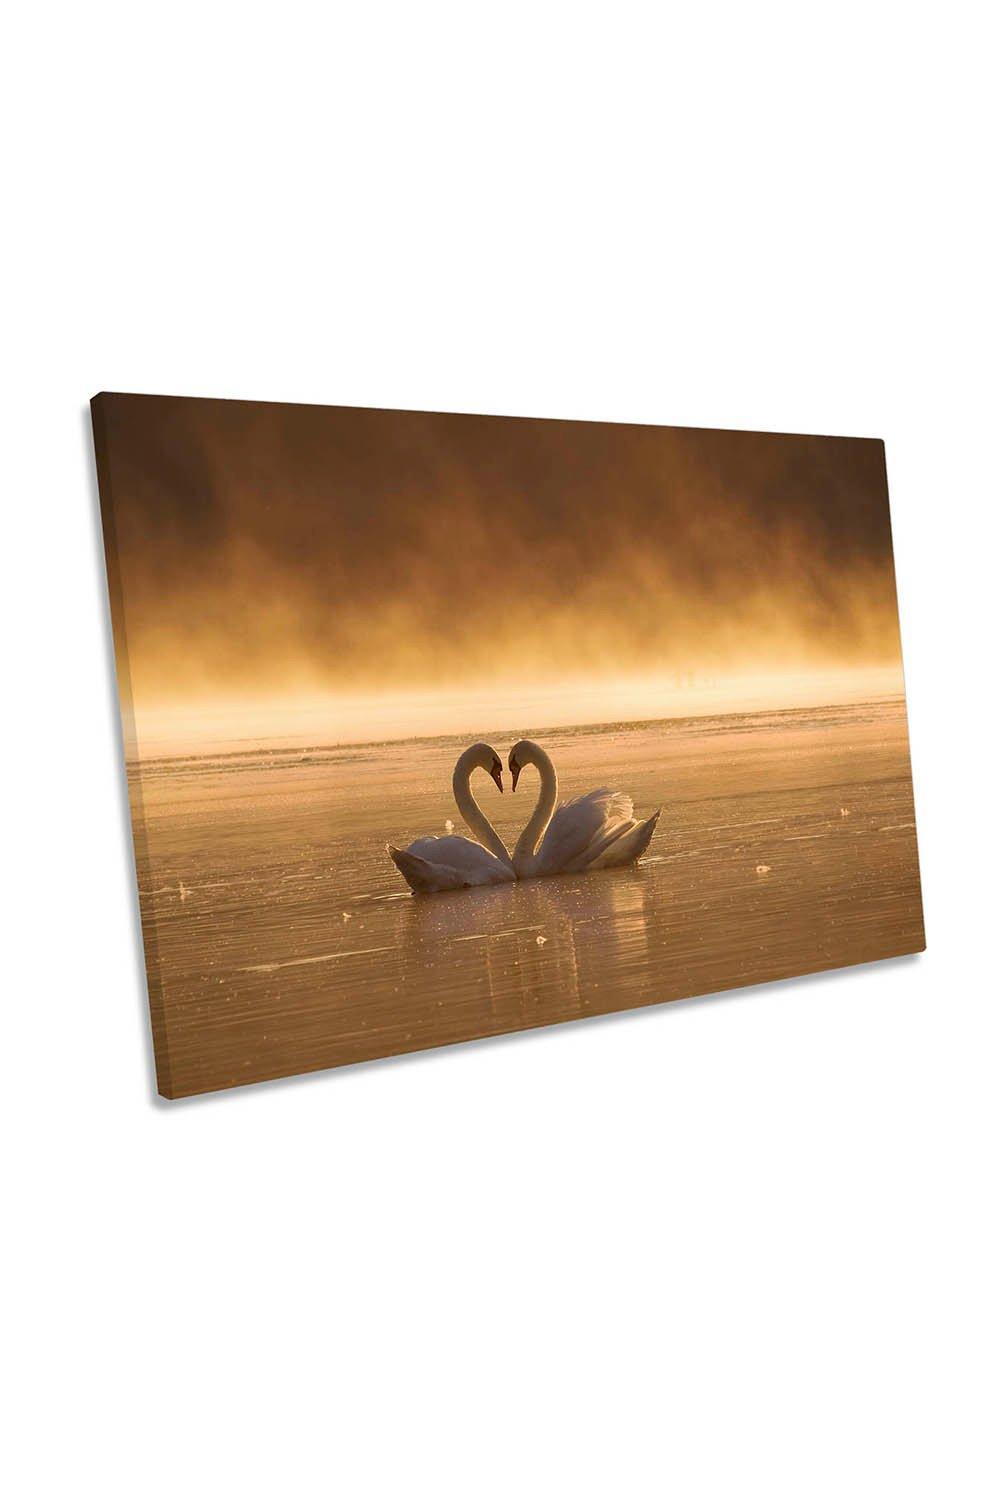 Lovers Swan Lake Sunset Canvas Wall Art Picture Print